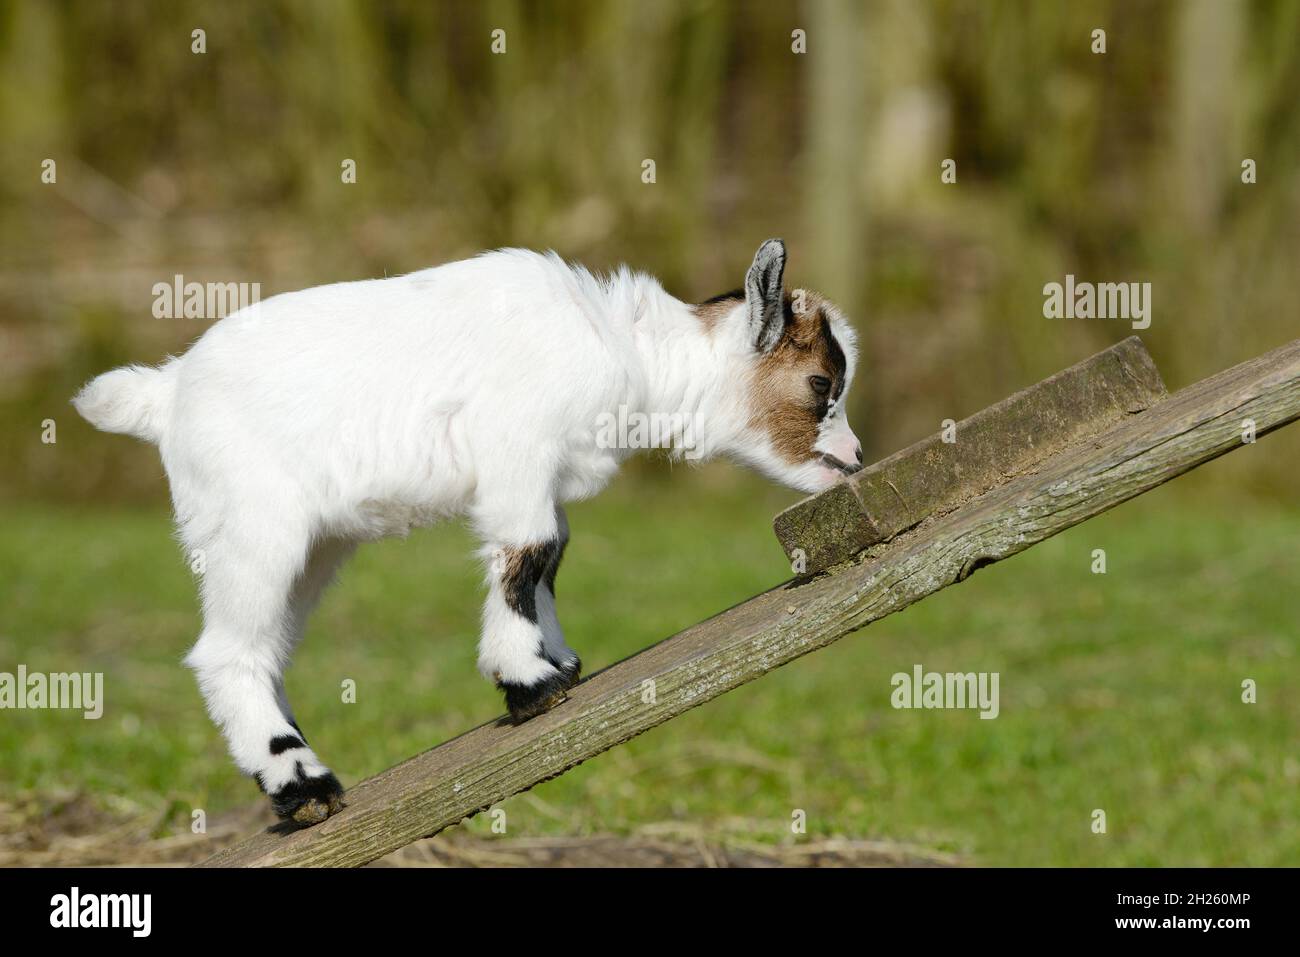 goat kid standing on wooden scaffolding Stock Photo